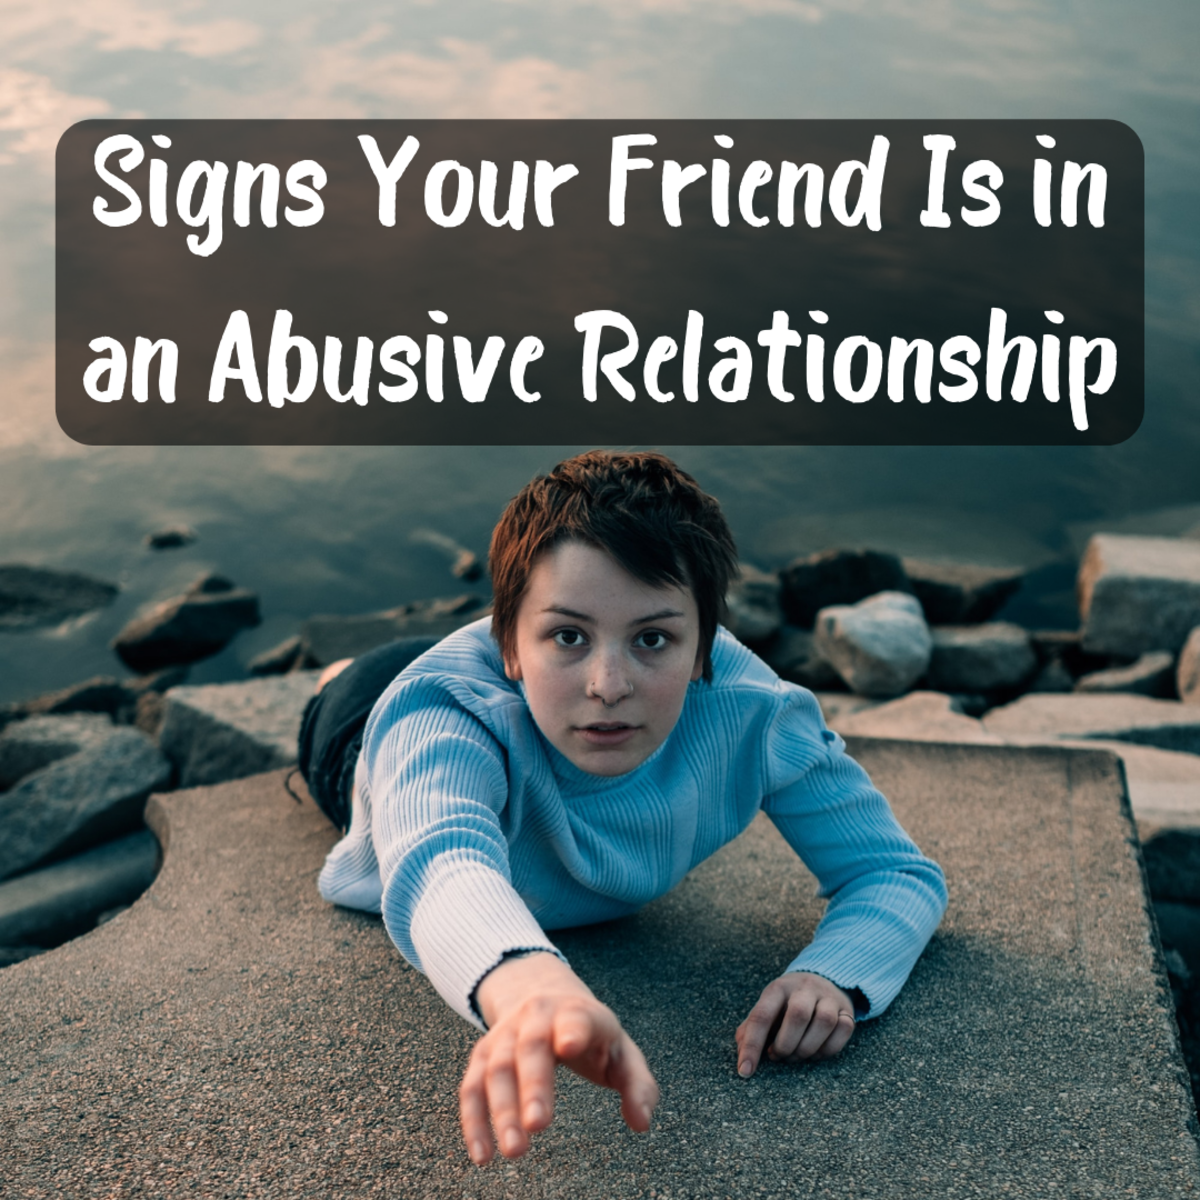 Signs Your Friend Is in an Abusive Relationship